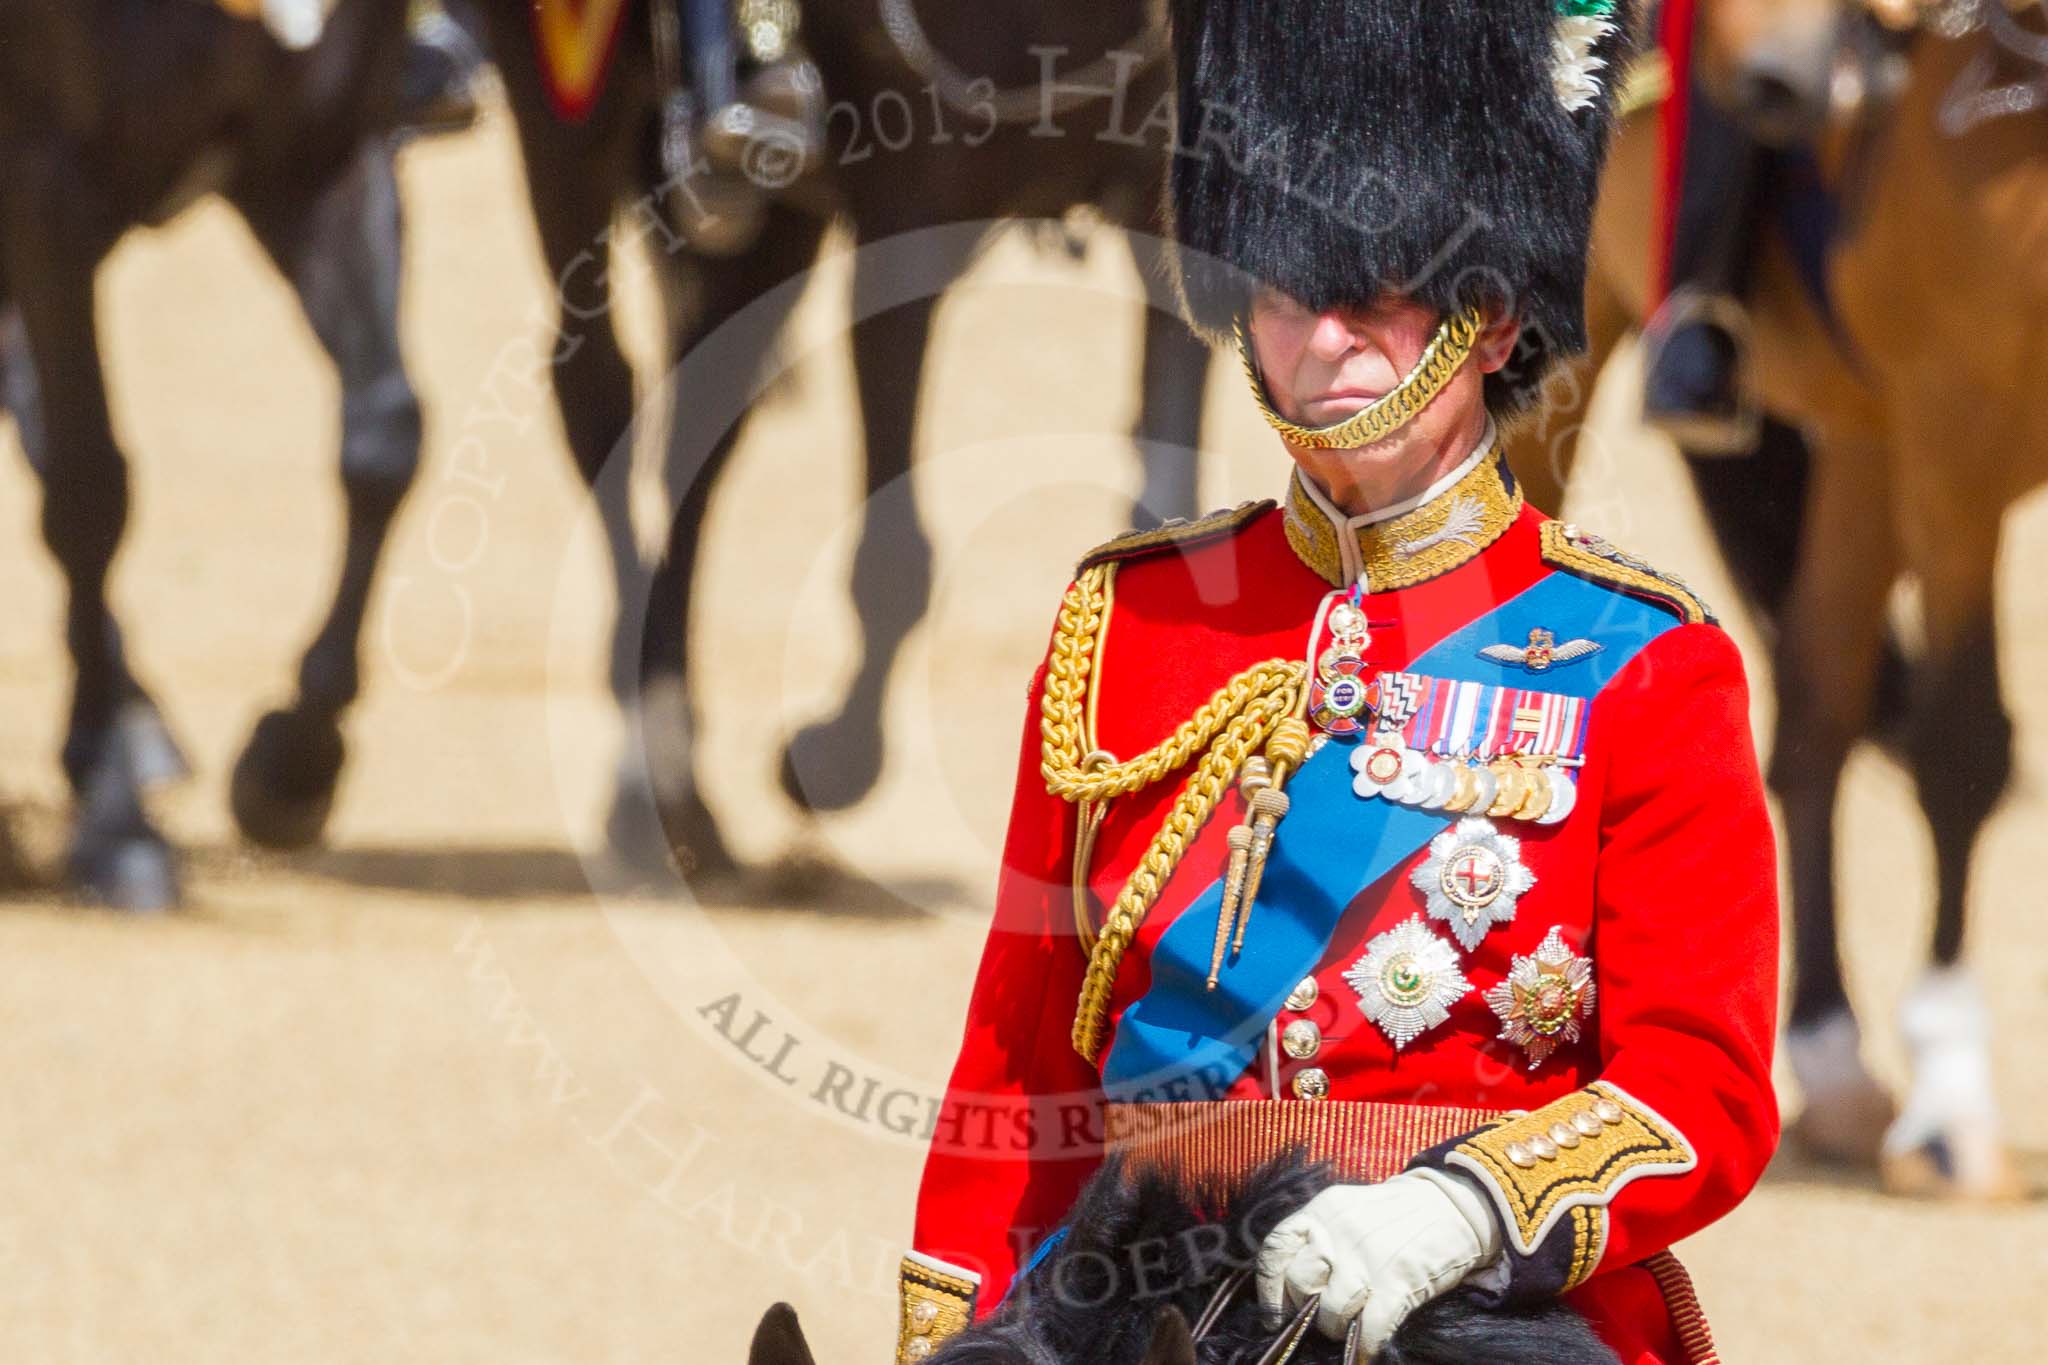 The Colonel's Review 2015.
Horse Guards Parade, Westminster,
London,

United Kingdom,
on 06 June 2015 at 10:59, image #191